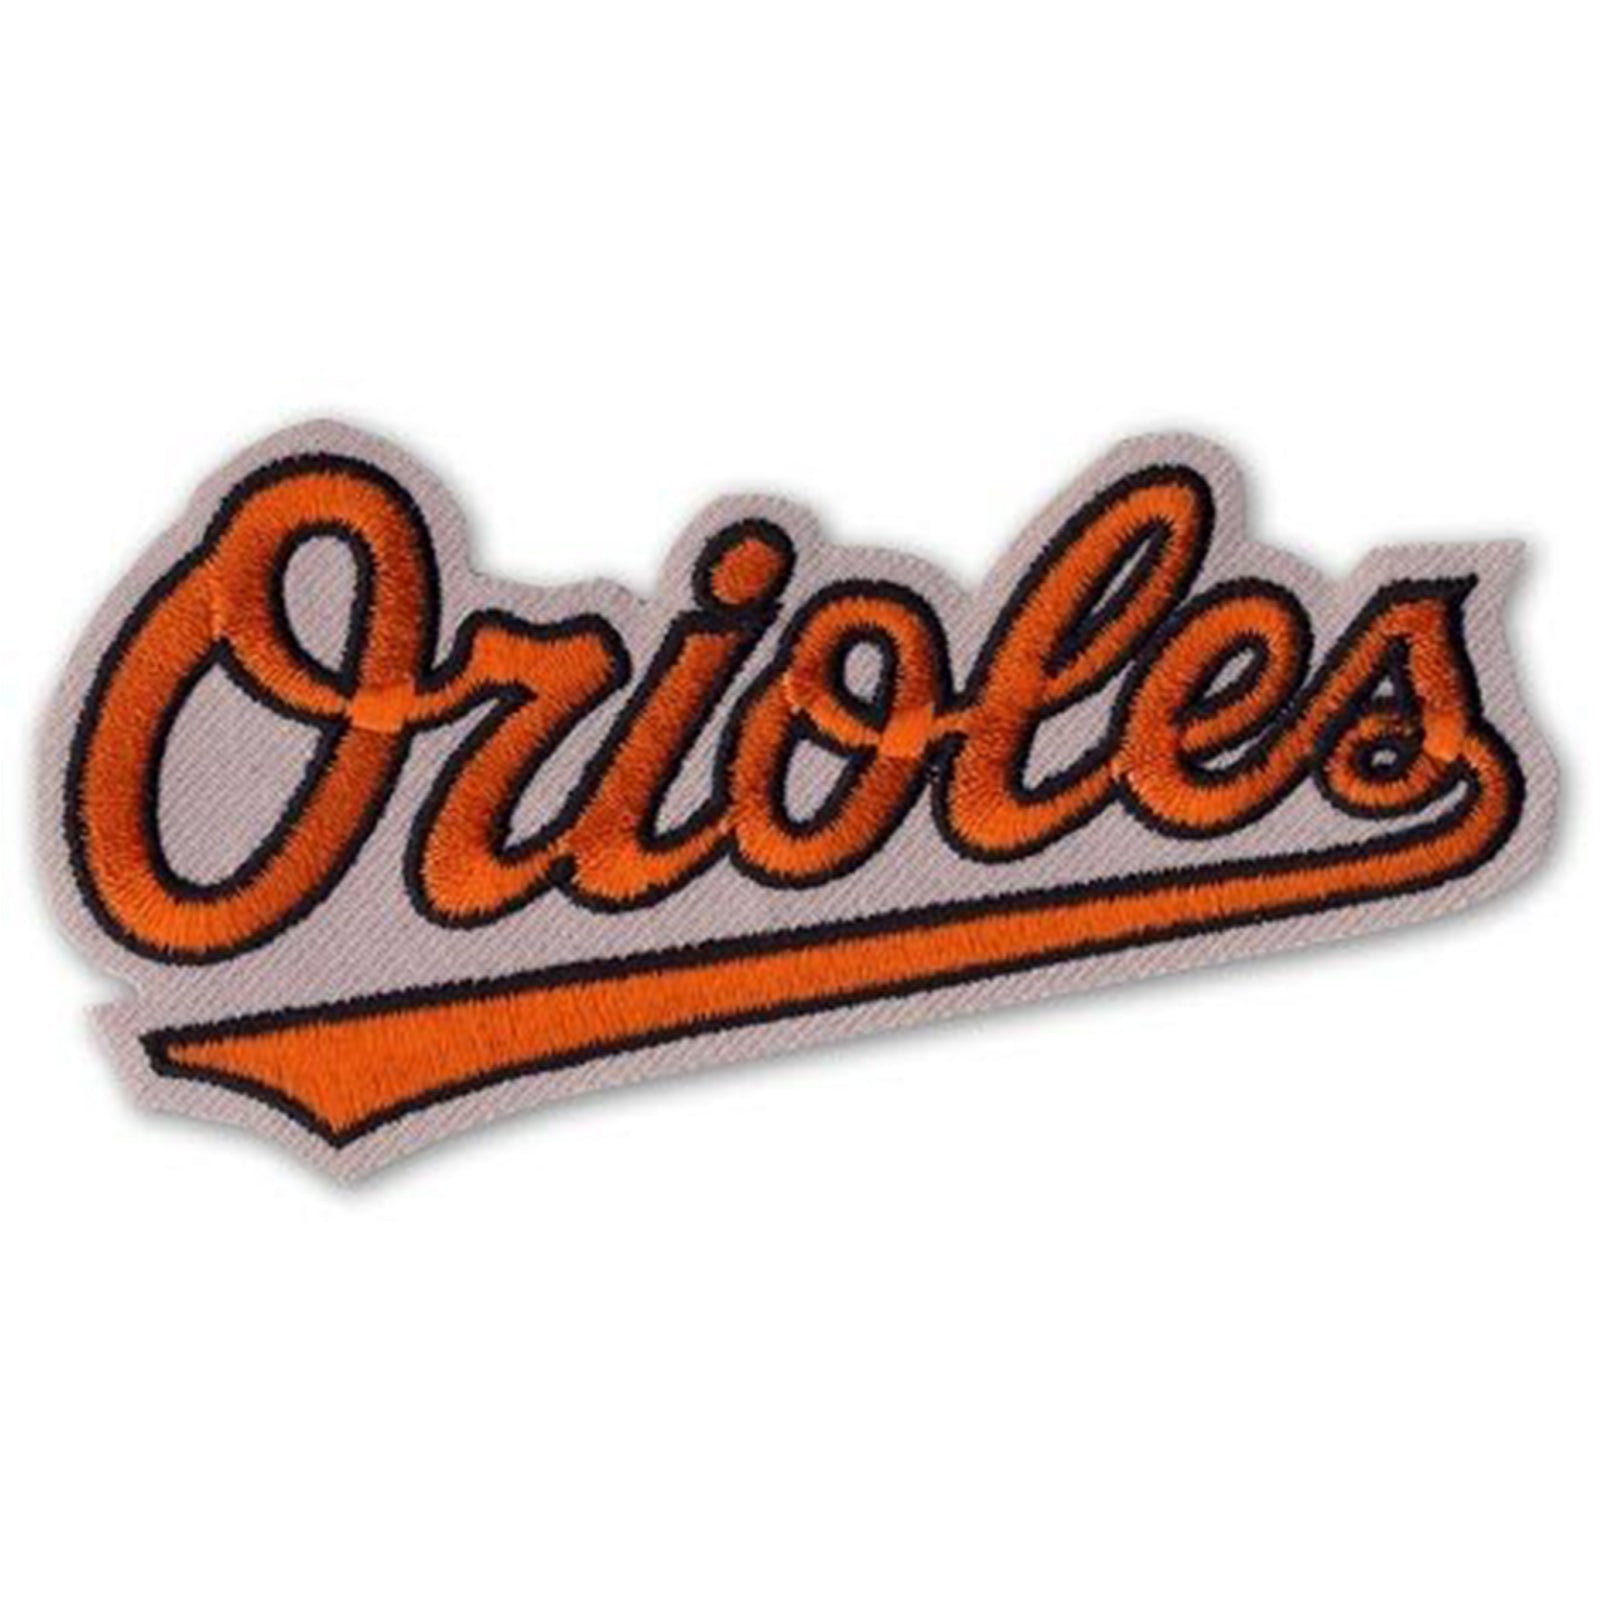 Baltimore Orioles Away Emblem Sleeve Patch